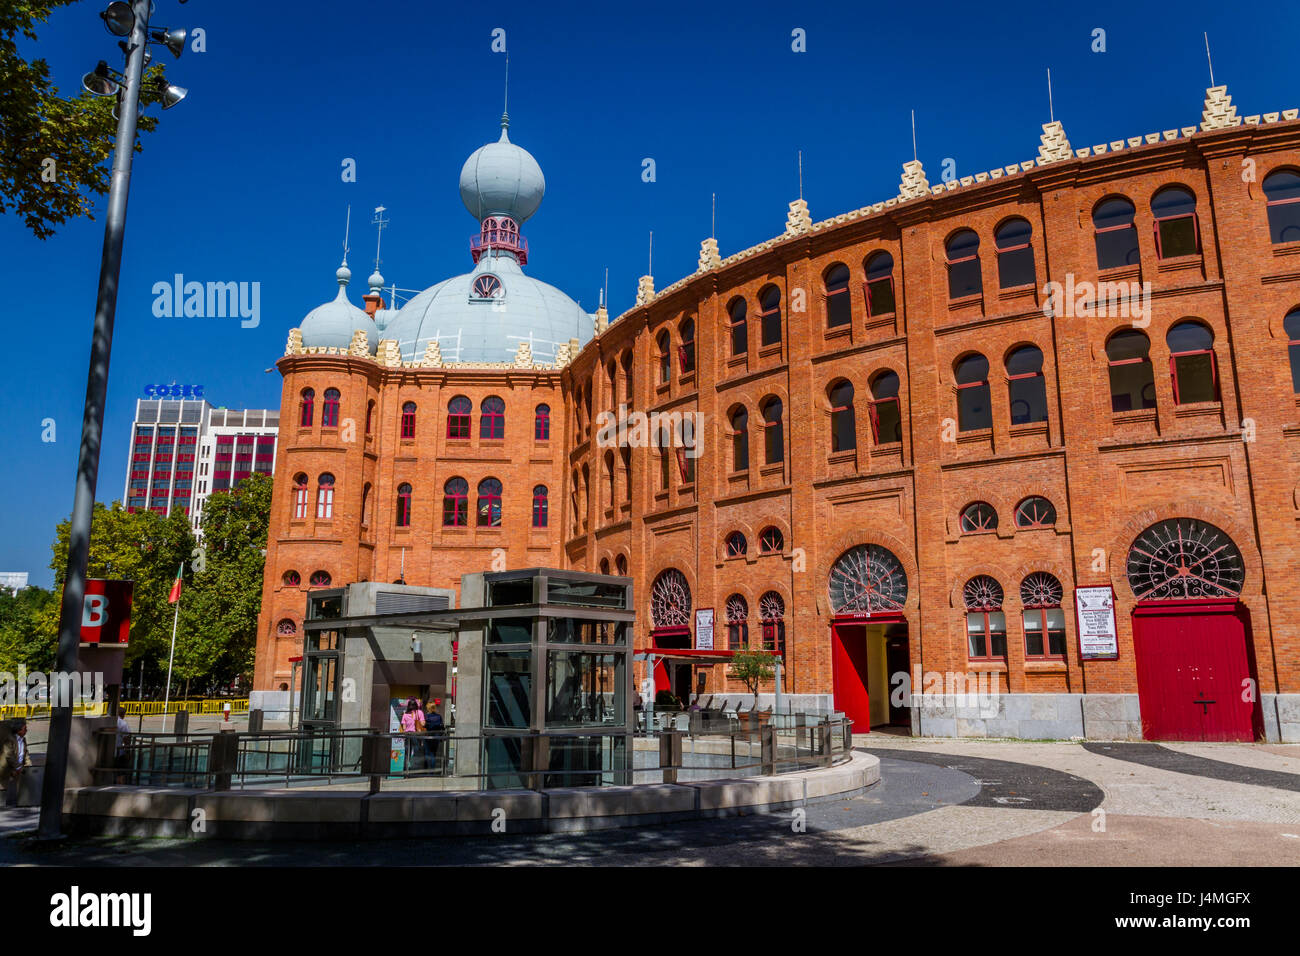 Camp Pequeno bullfighting ring in Lisbon, Portugal Stock Photo